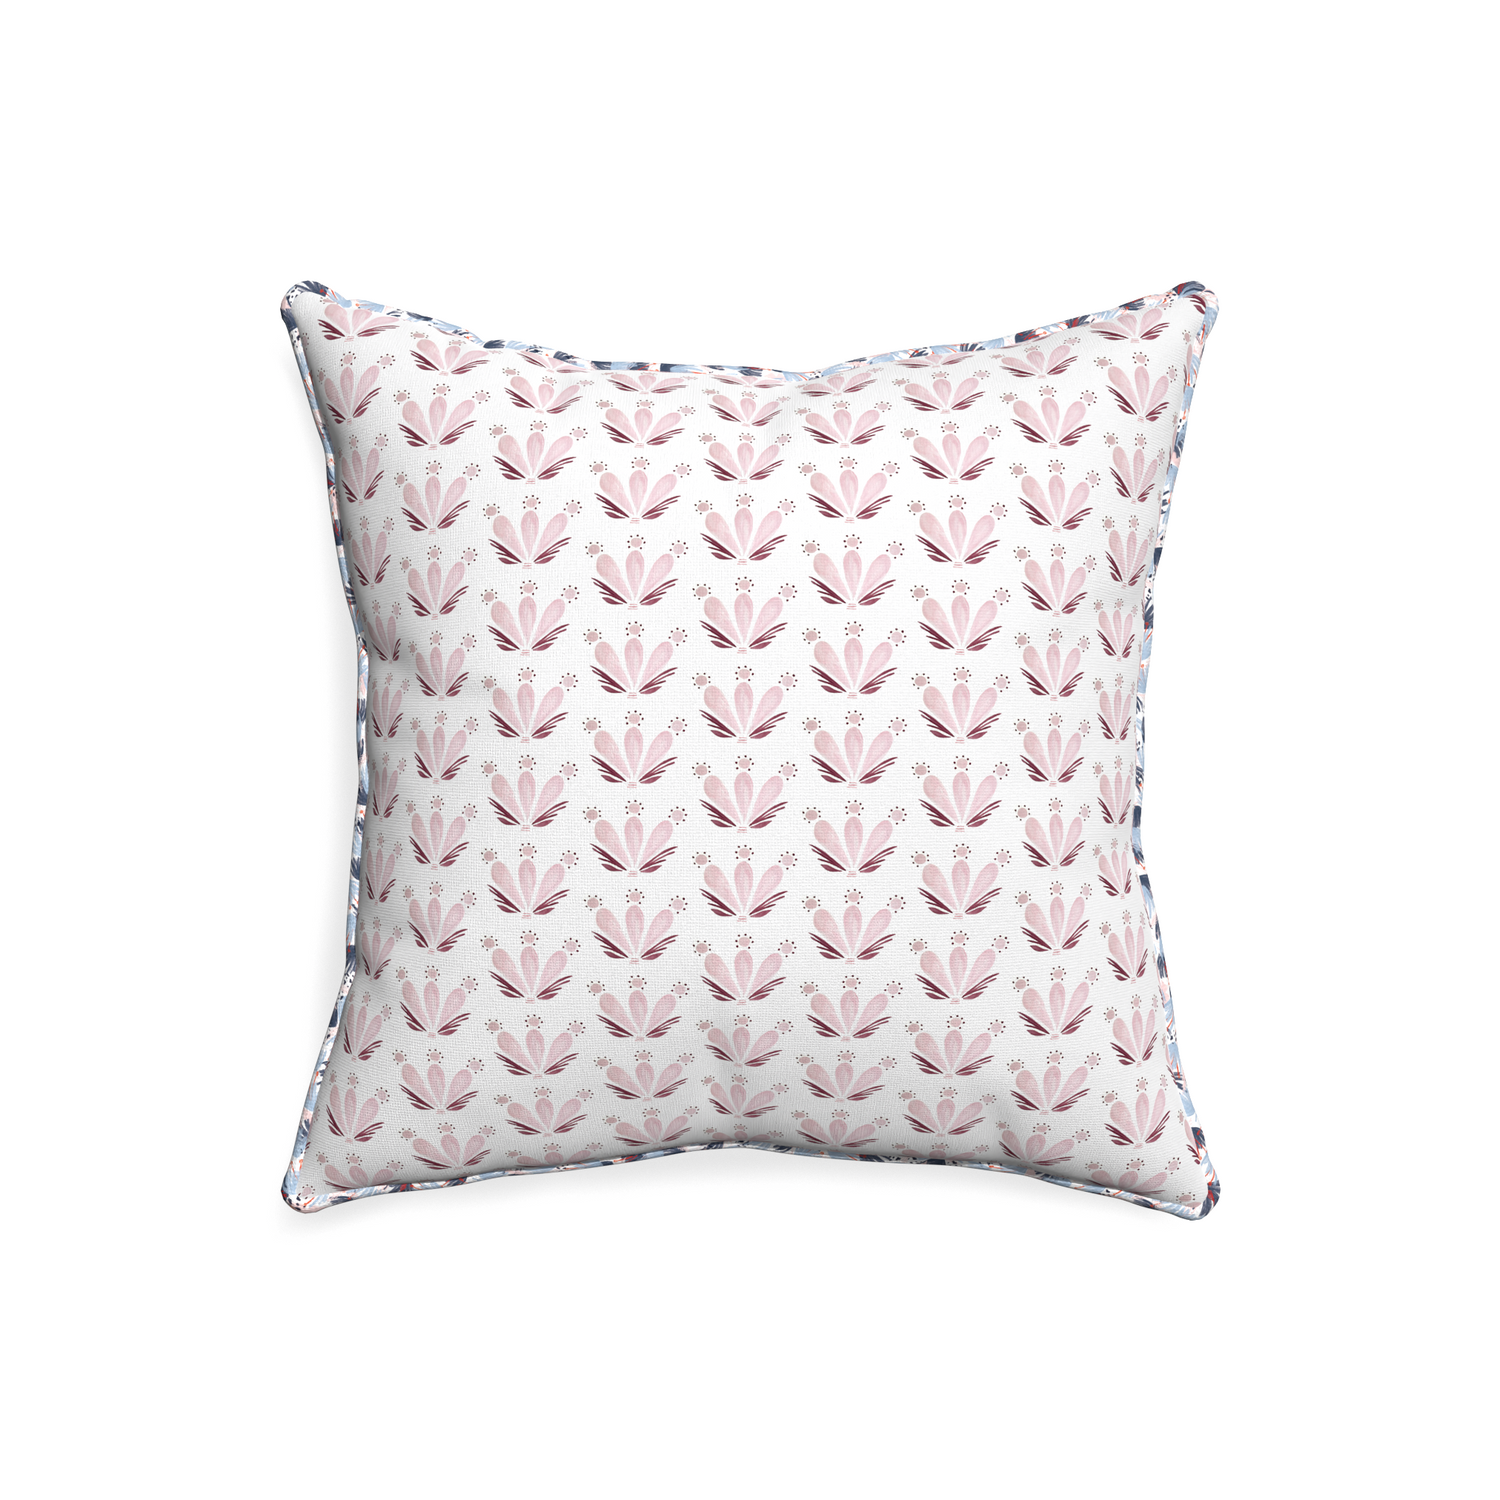 20-square serena pink custom pillow with e piping on white background